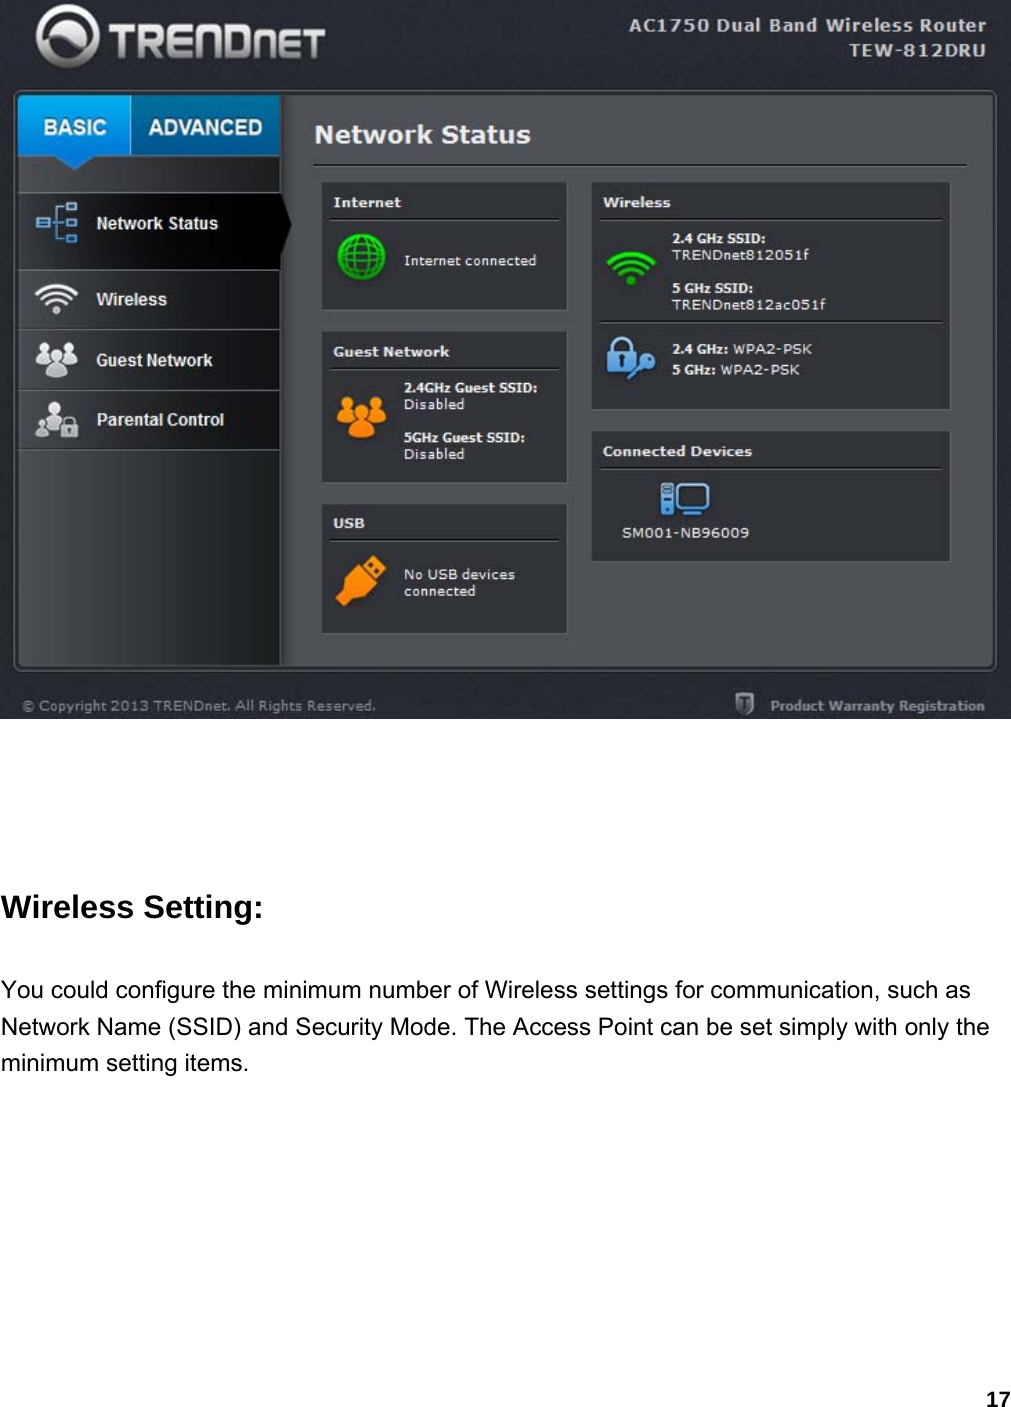 17   Wireless Setting: You could configure the minimum number of Wireless settings for communication, such as Network Name (SSID) and Security Mode. The Access Point can be set simply with only the minimum setting items. 